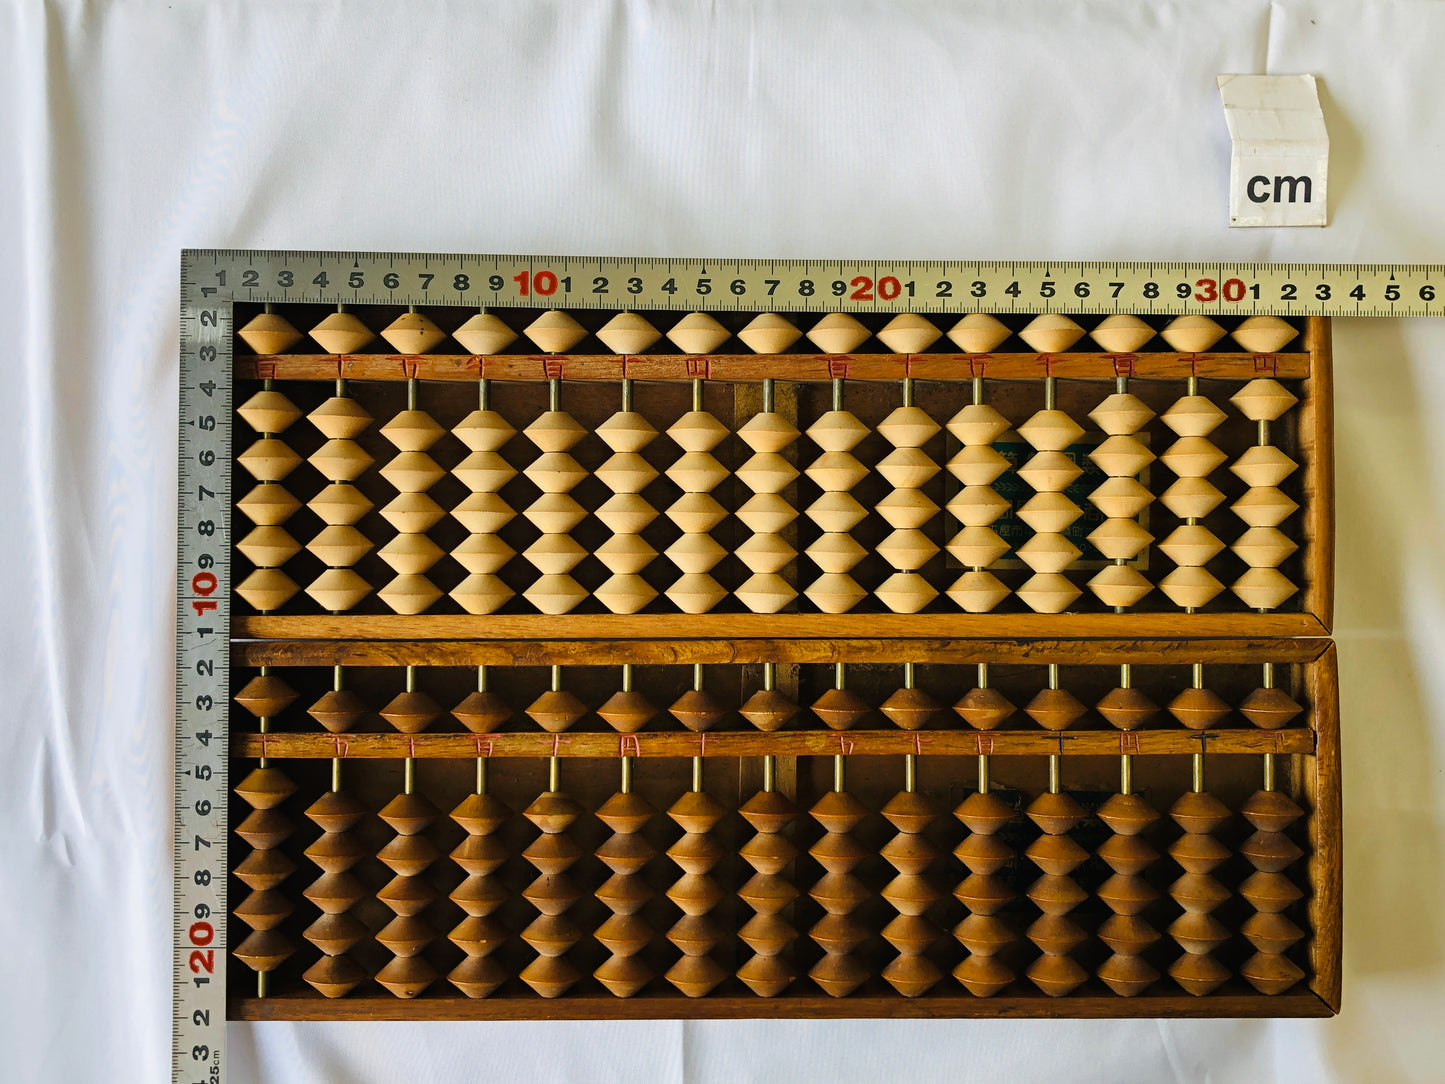 Y4396 SOROBAN 2 wooden Abacus abacuses abaci Japan antique math counting machine